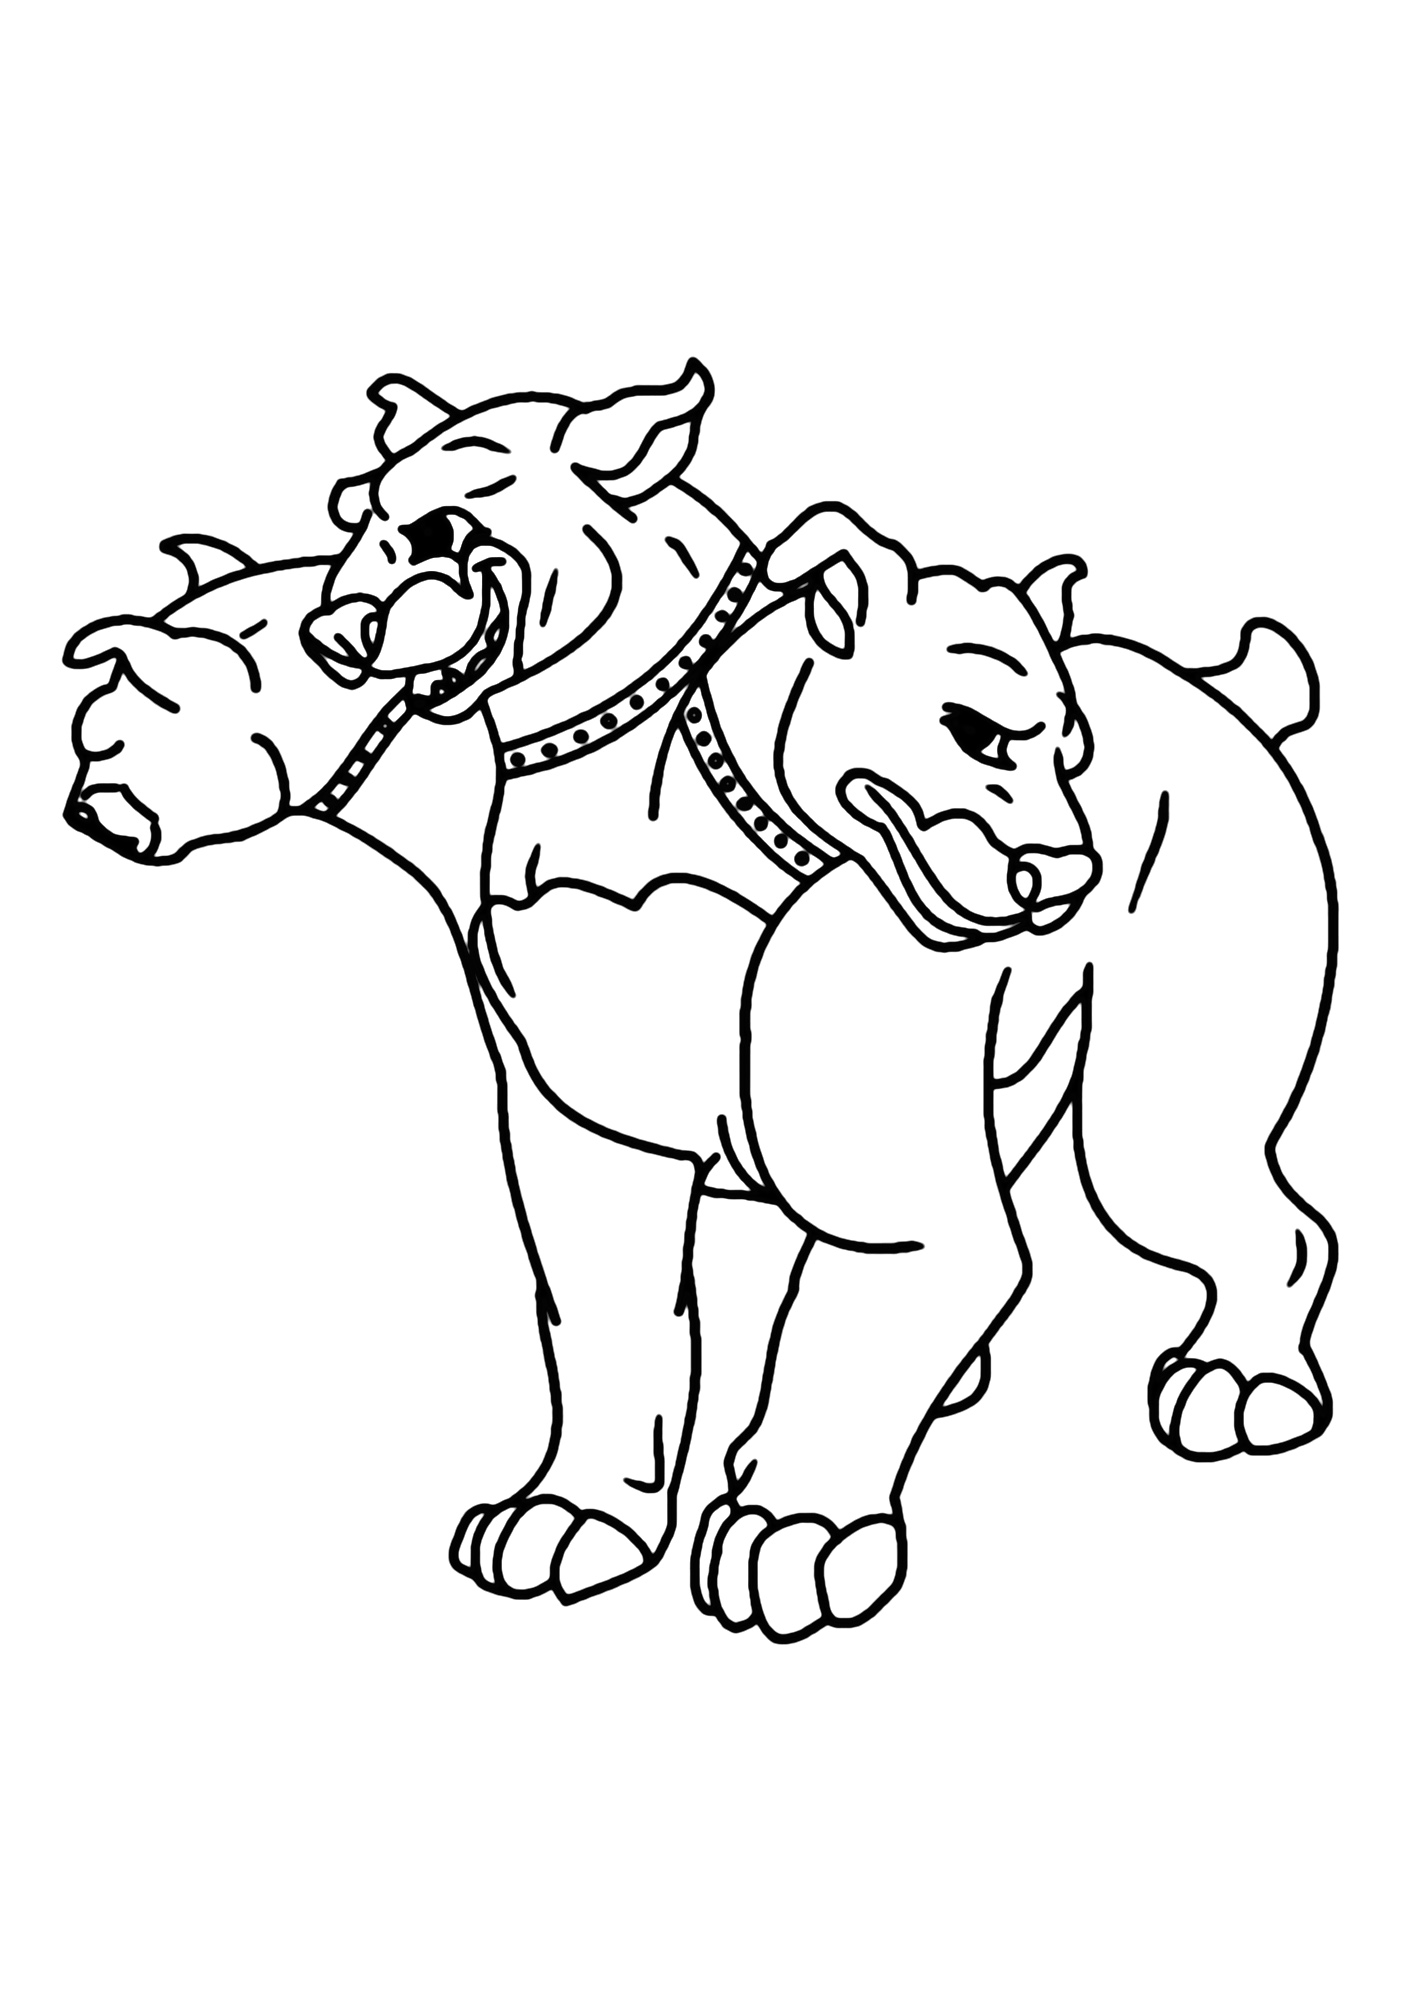 3 Headed Dog From Harry Potter Coloring Page